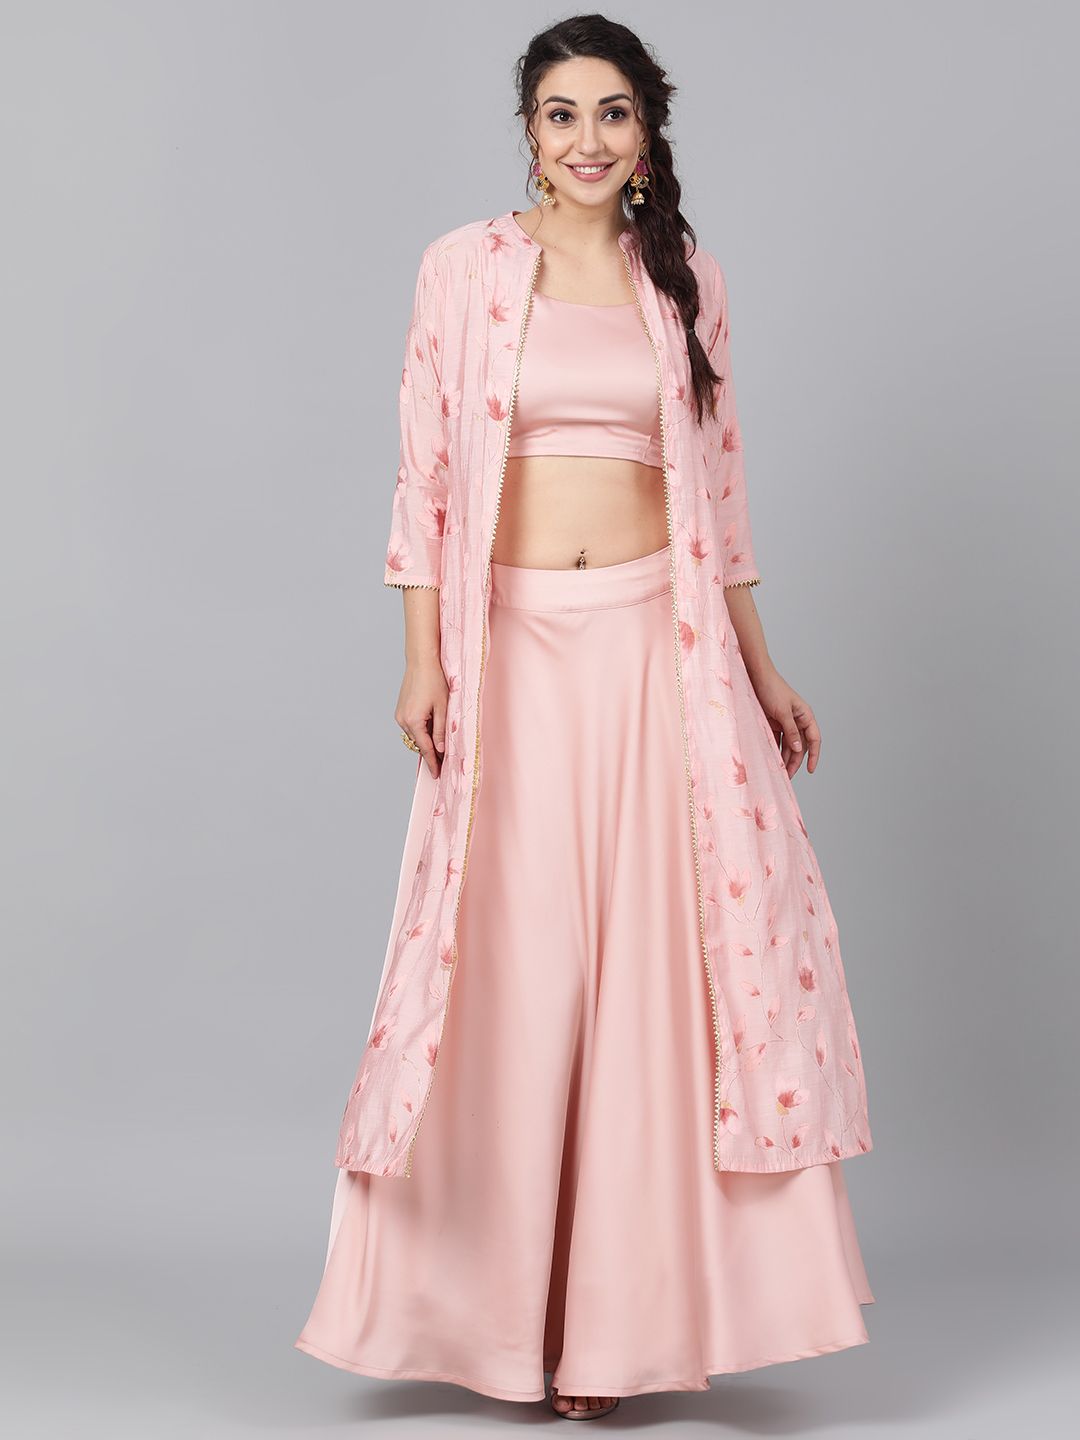 [Available] Premium Pink Lengha with Jacket [crop top and skirt]